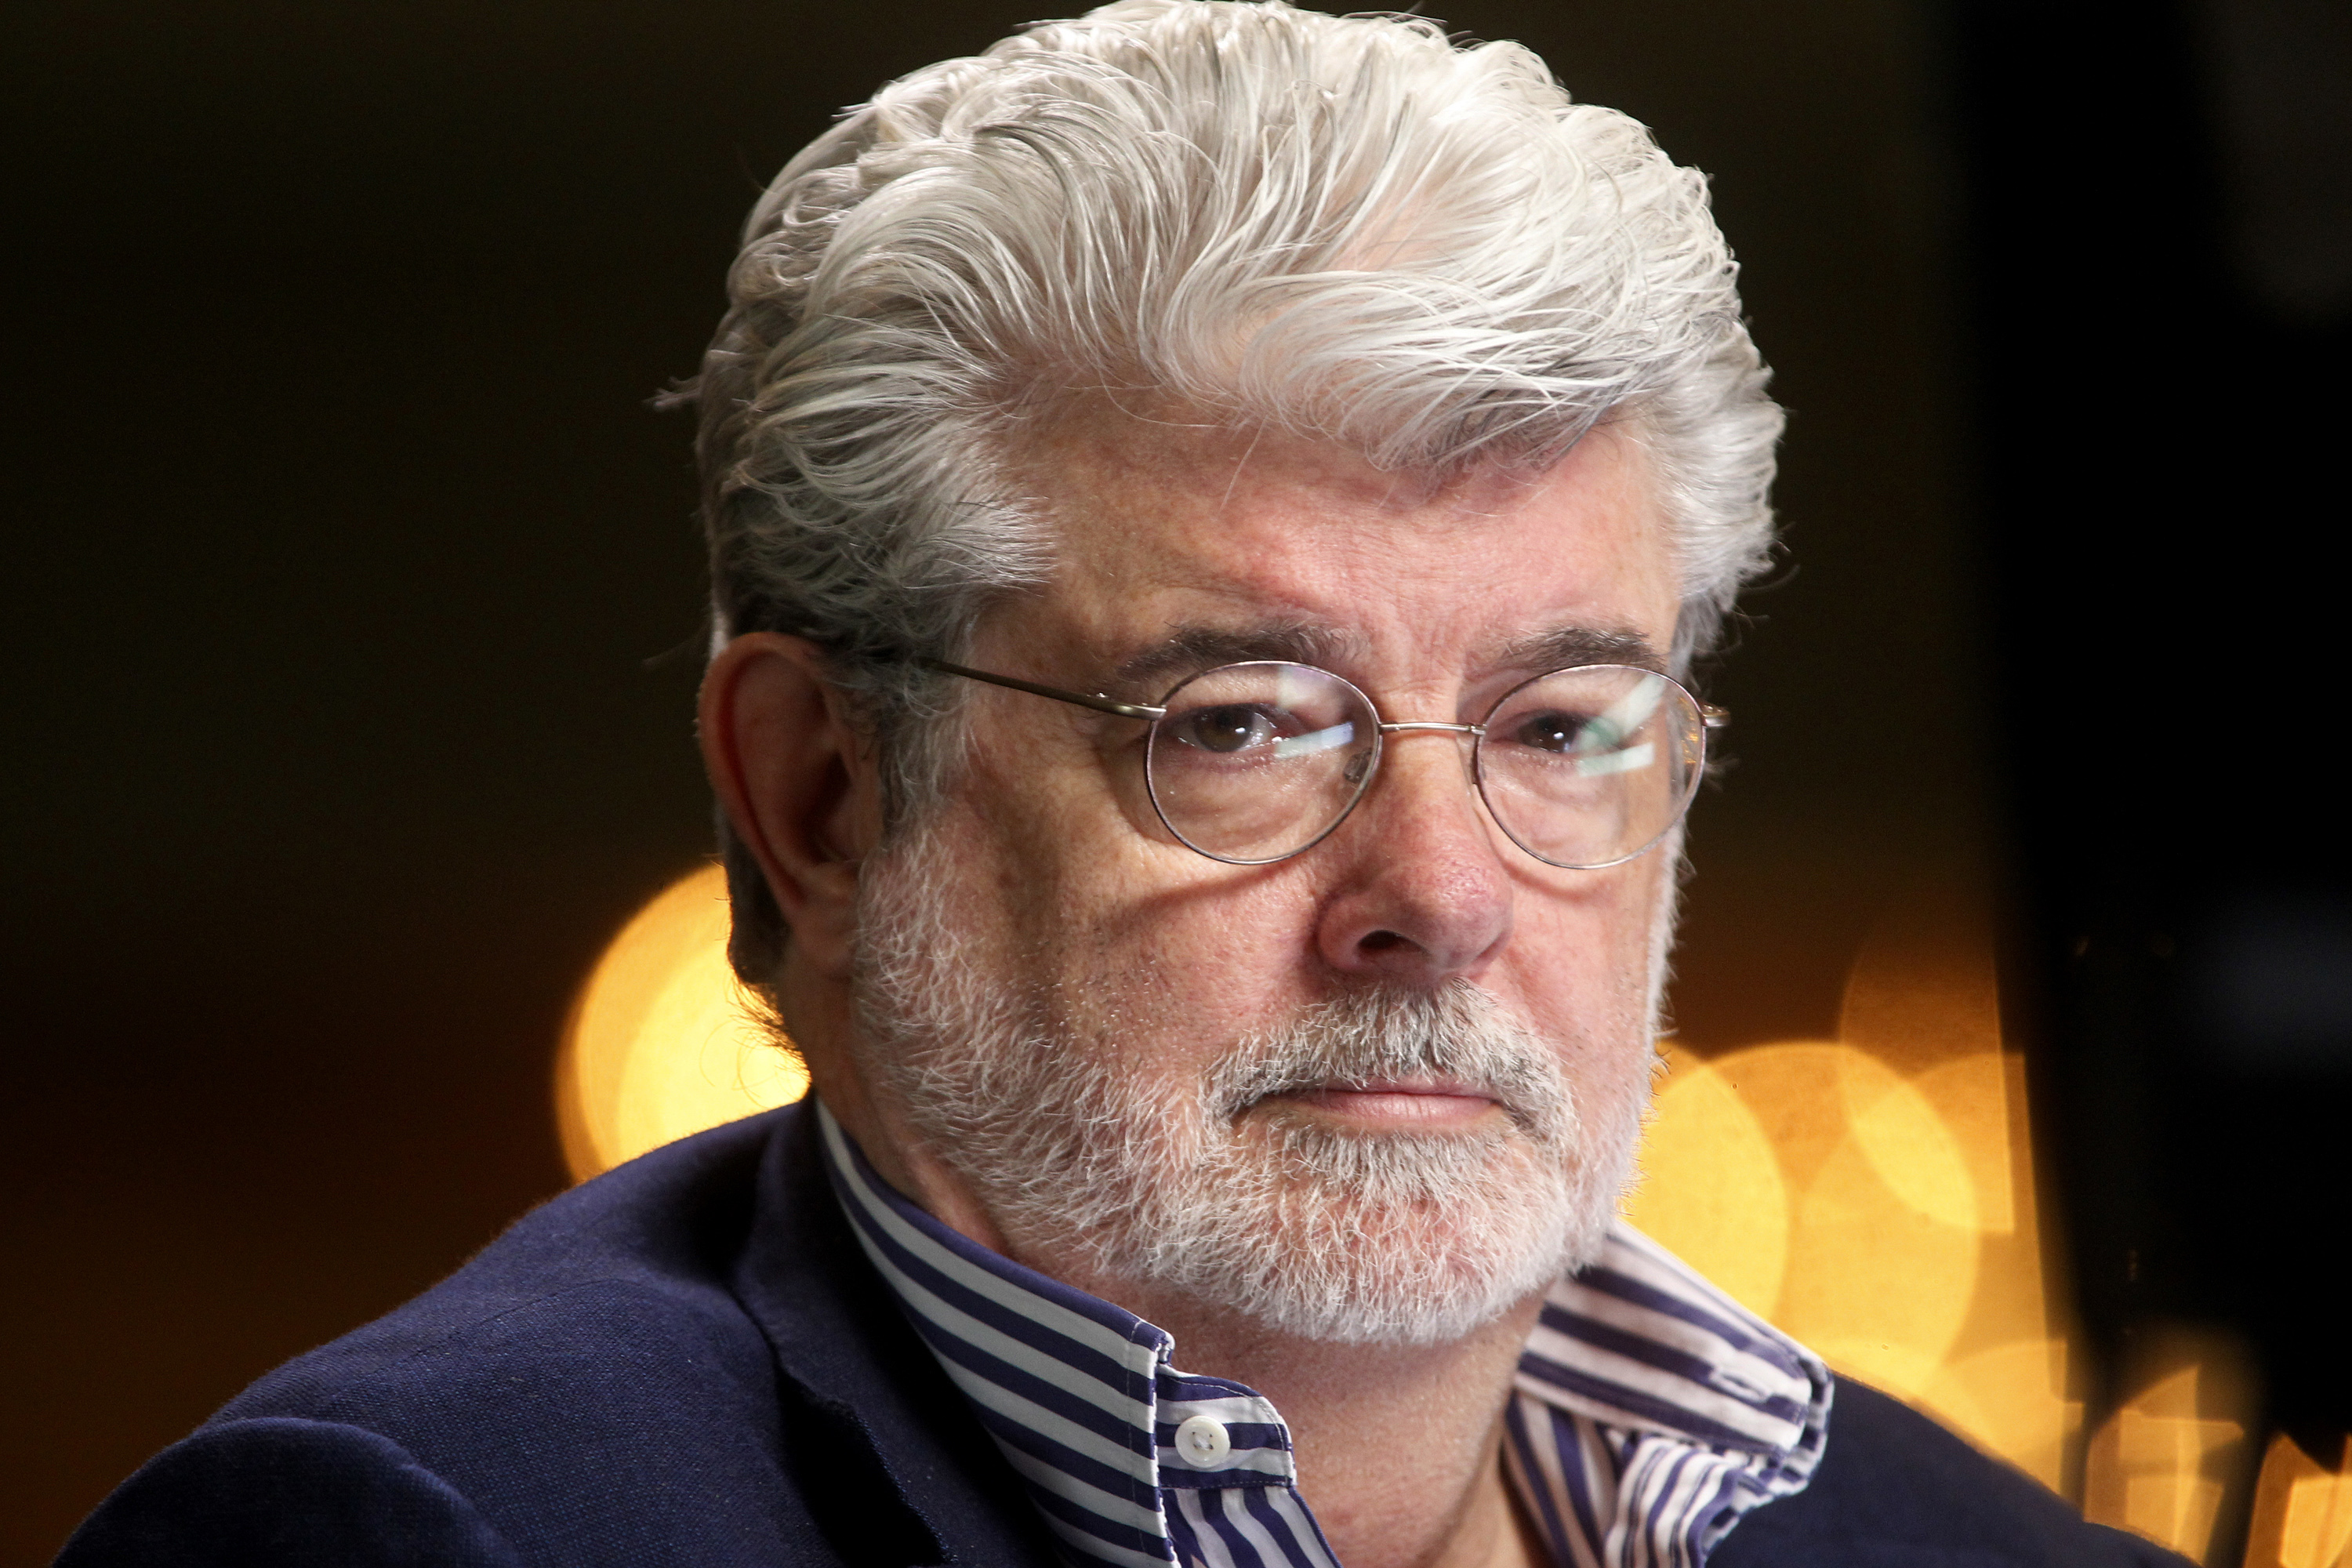 Filmmaker and Chairman of the Board of Lucasfilm Ltd. George Lucas waits to do a television interview in Beverly Hills